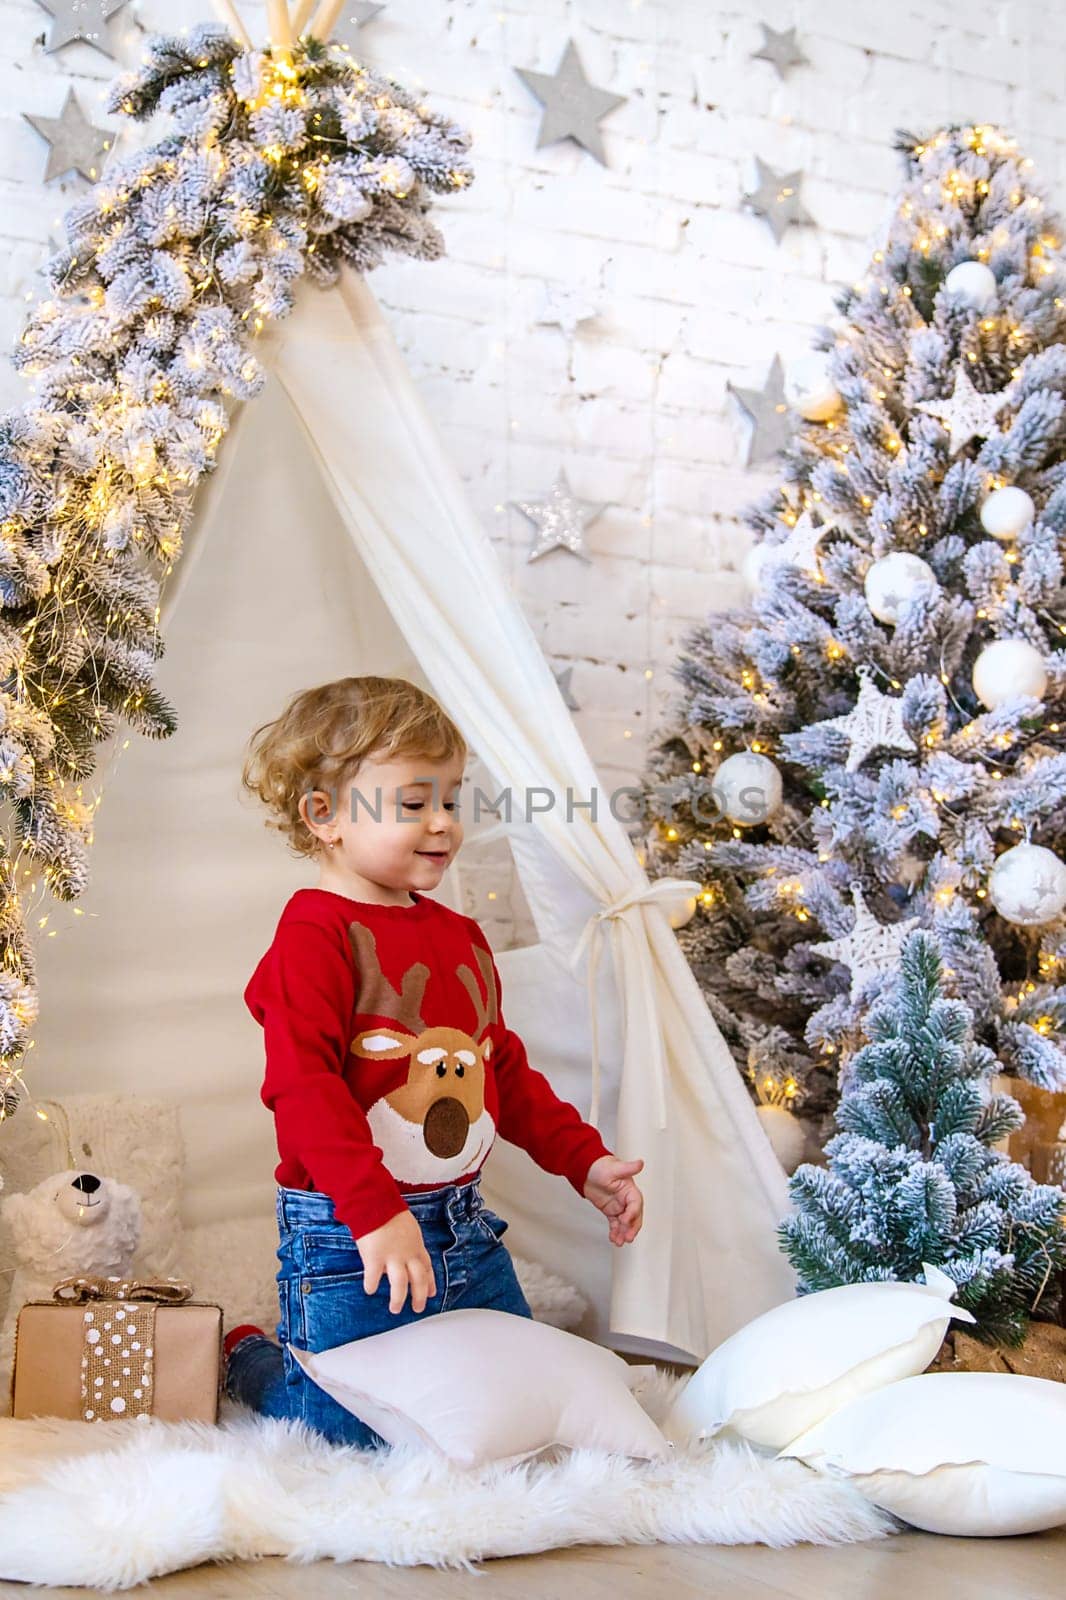 Child in his room decor christmas. Selective focus. Kid.